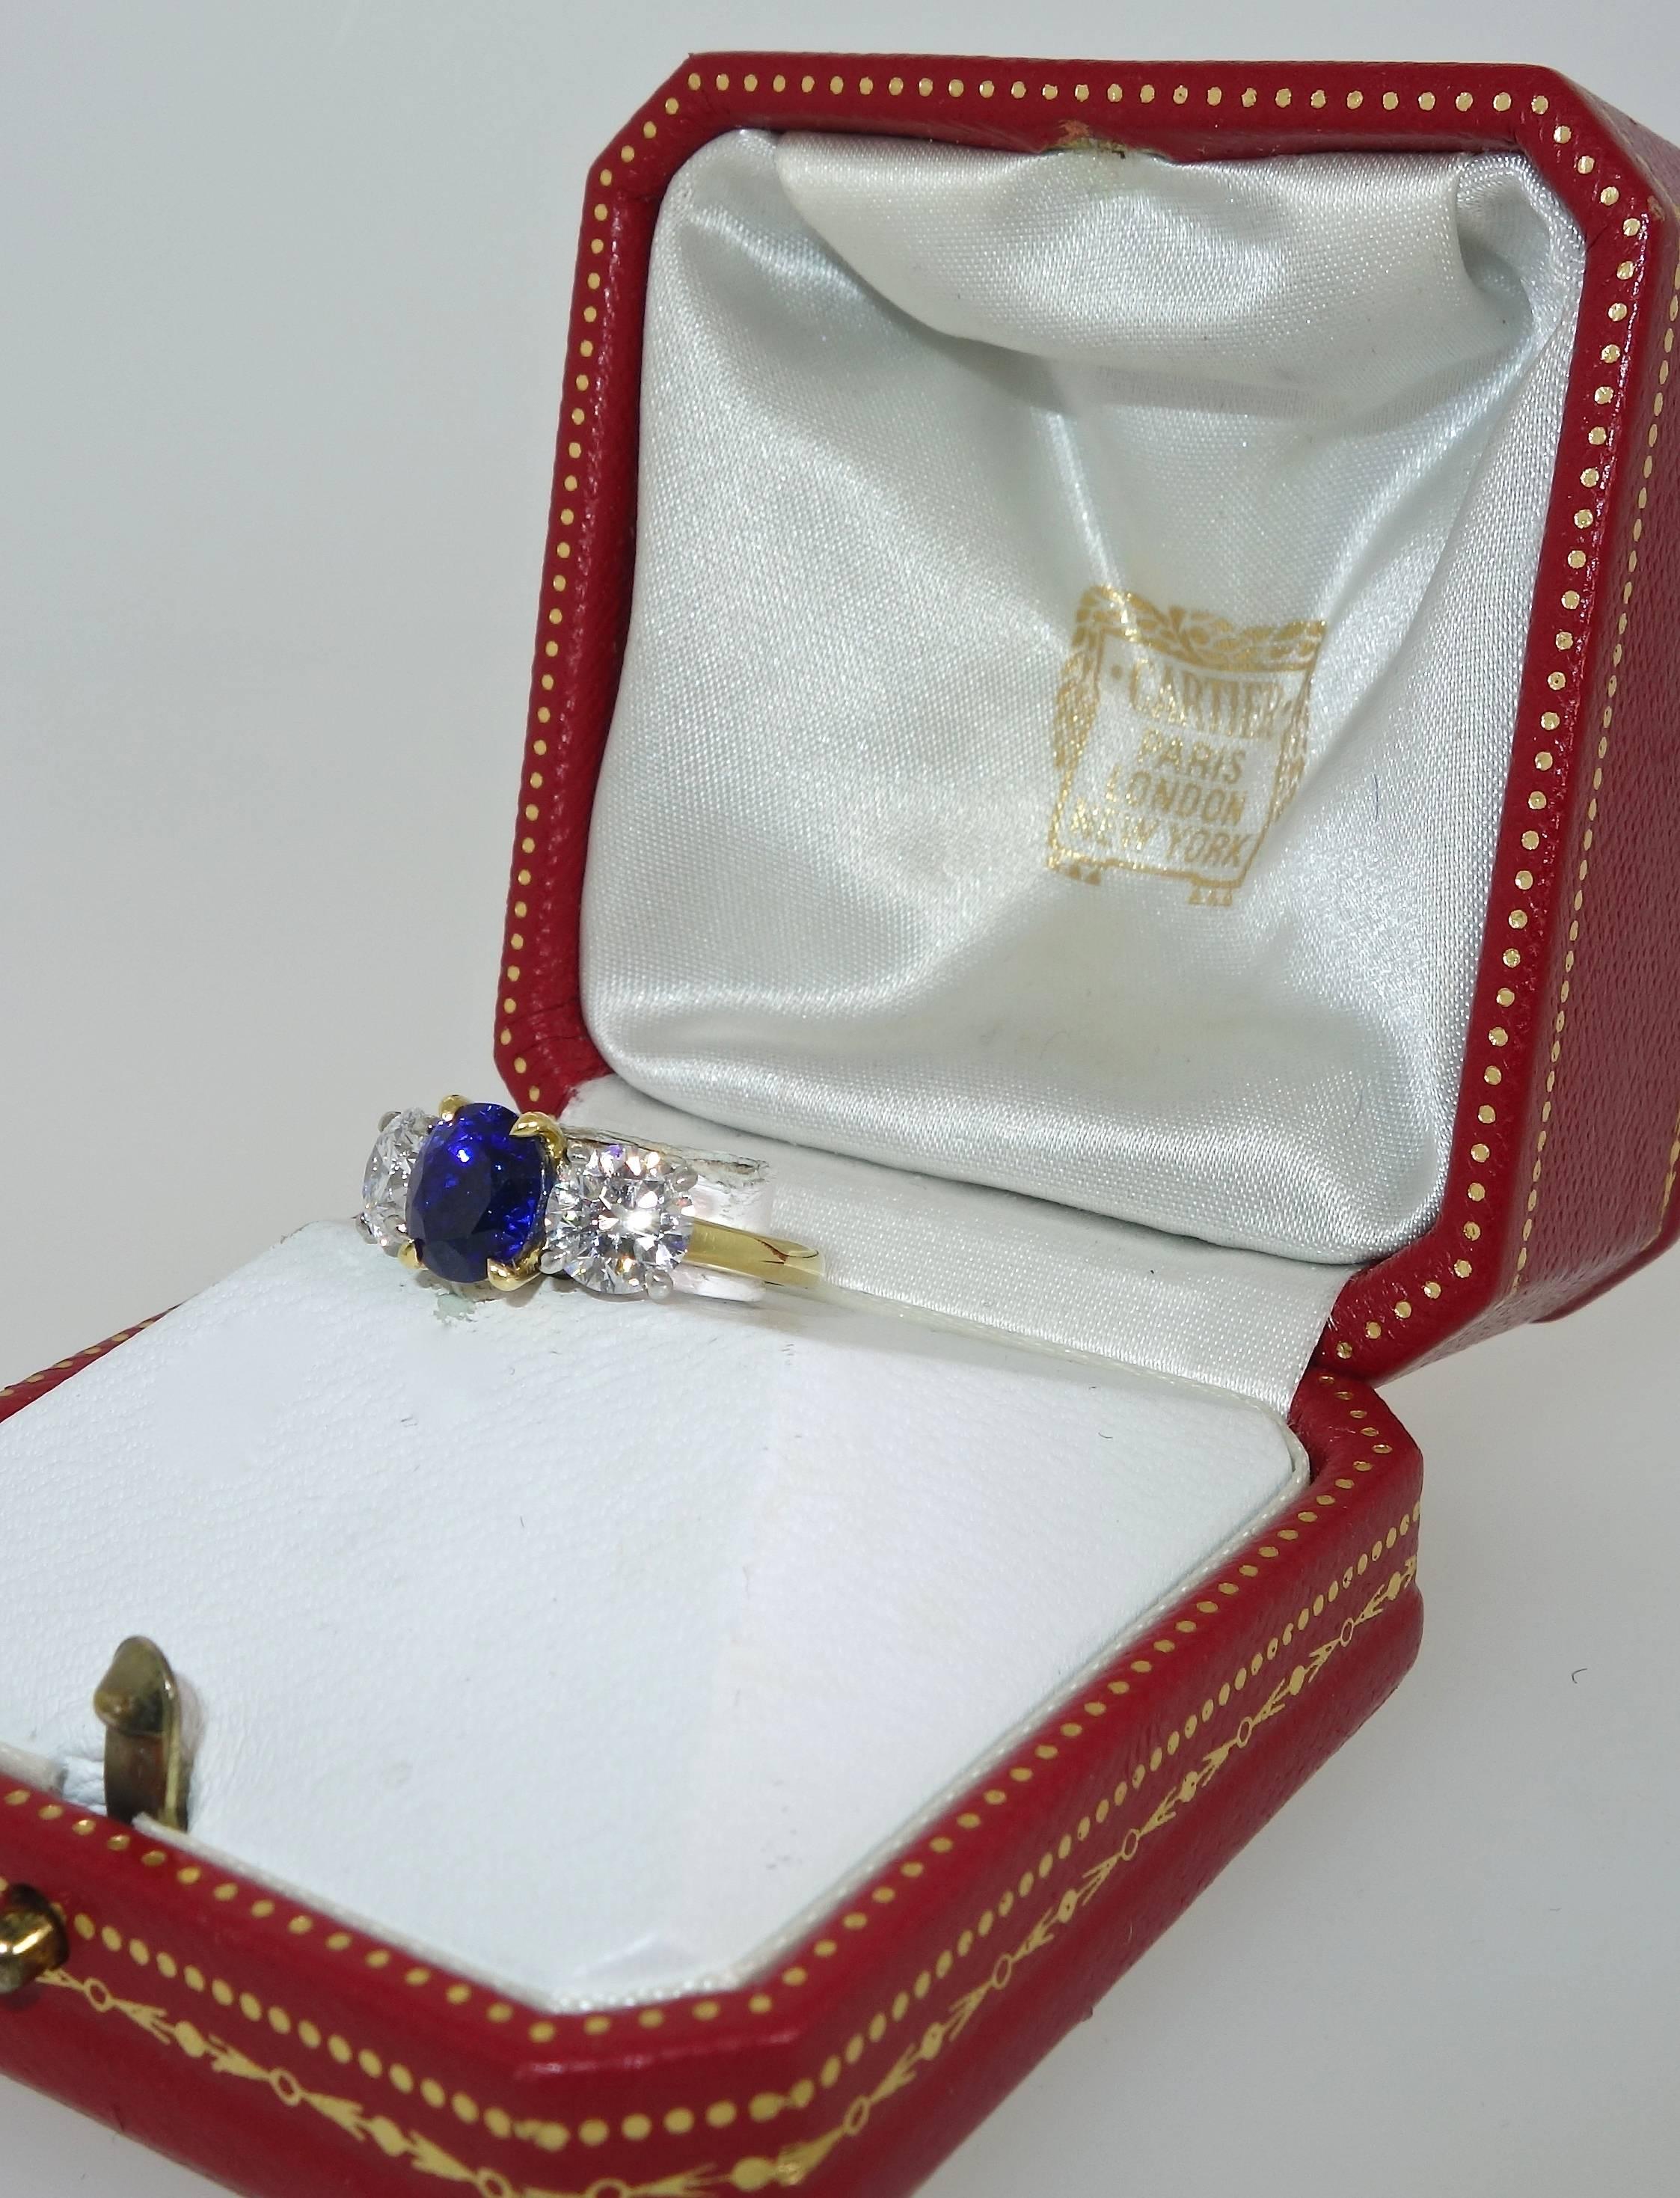 Women's or Men's Cartier Diamond and Sapphire Ring